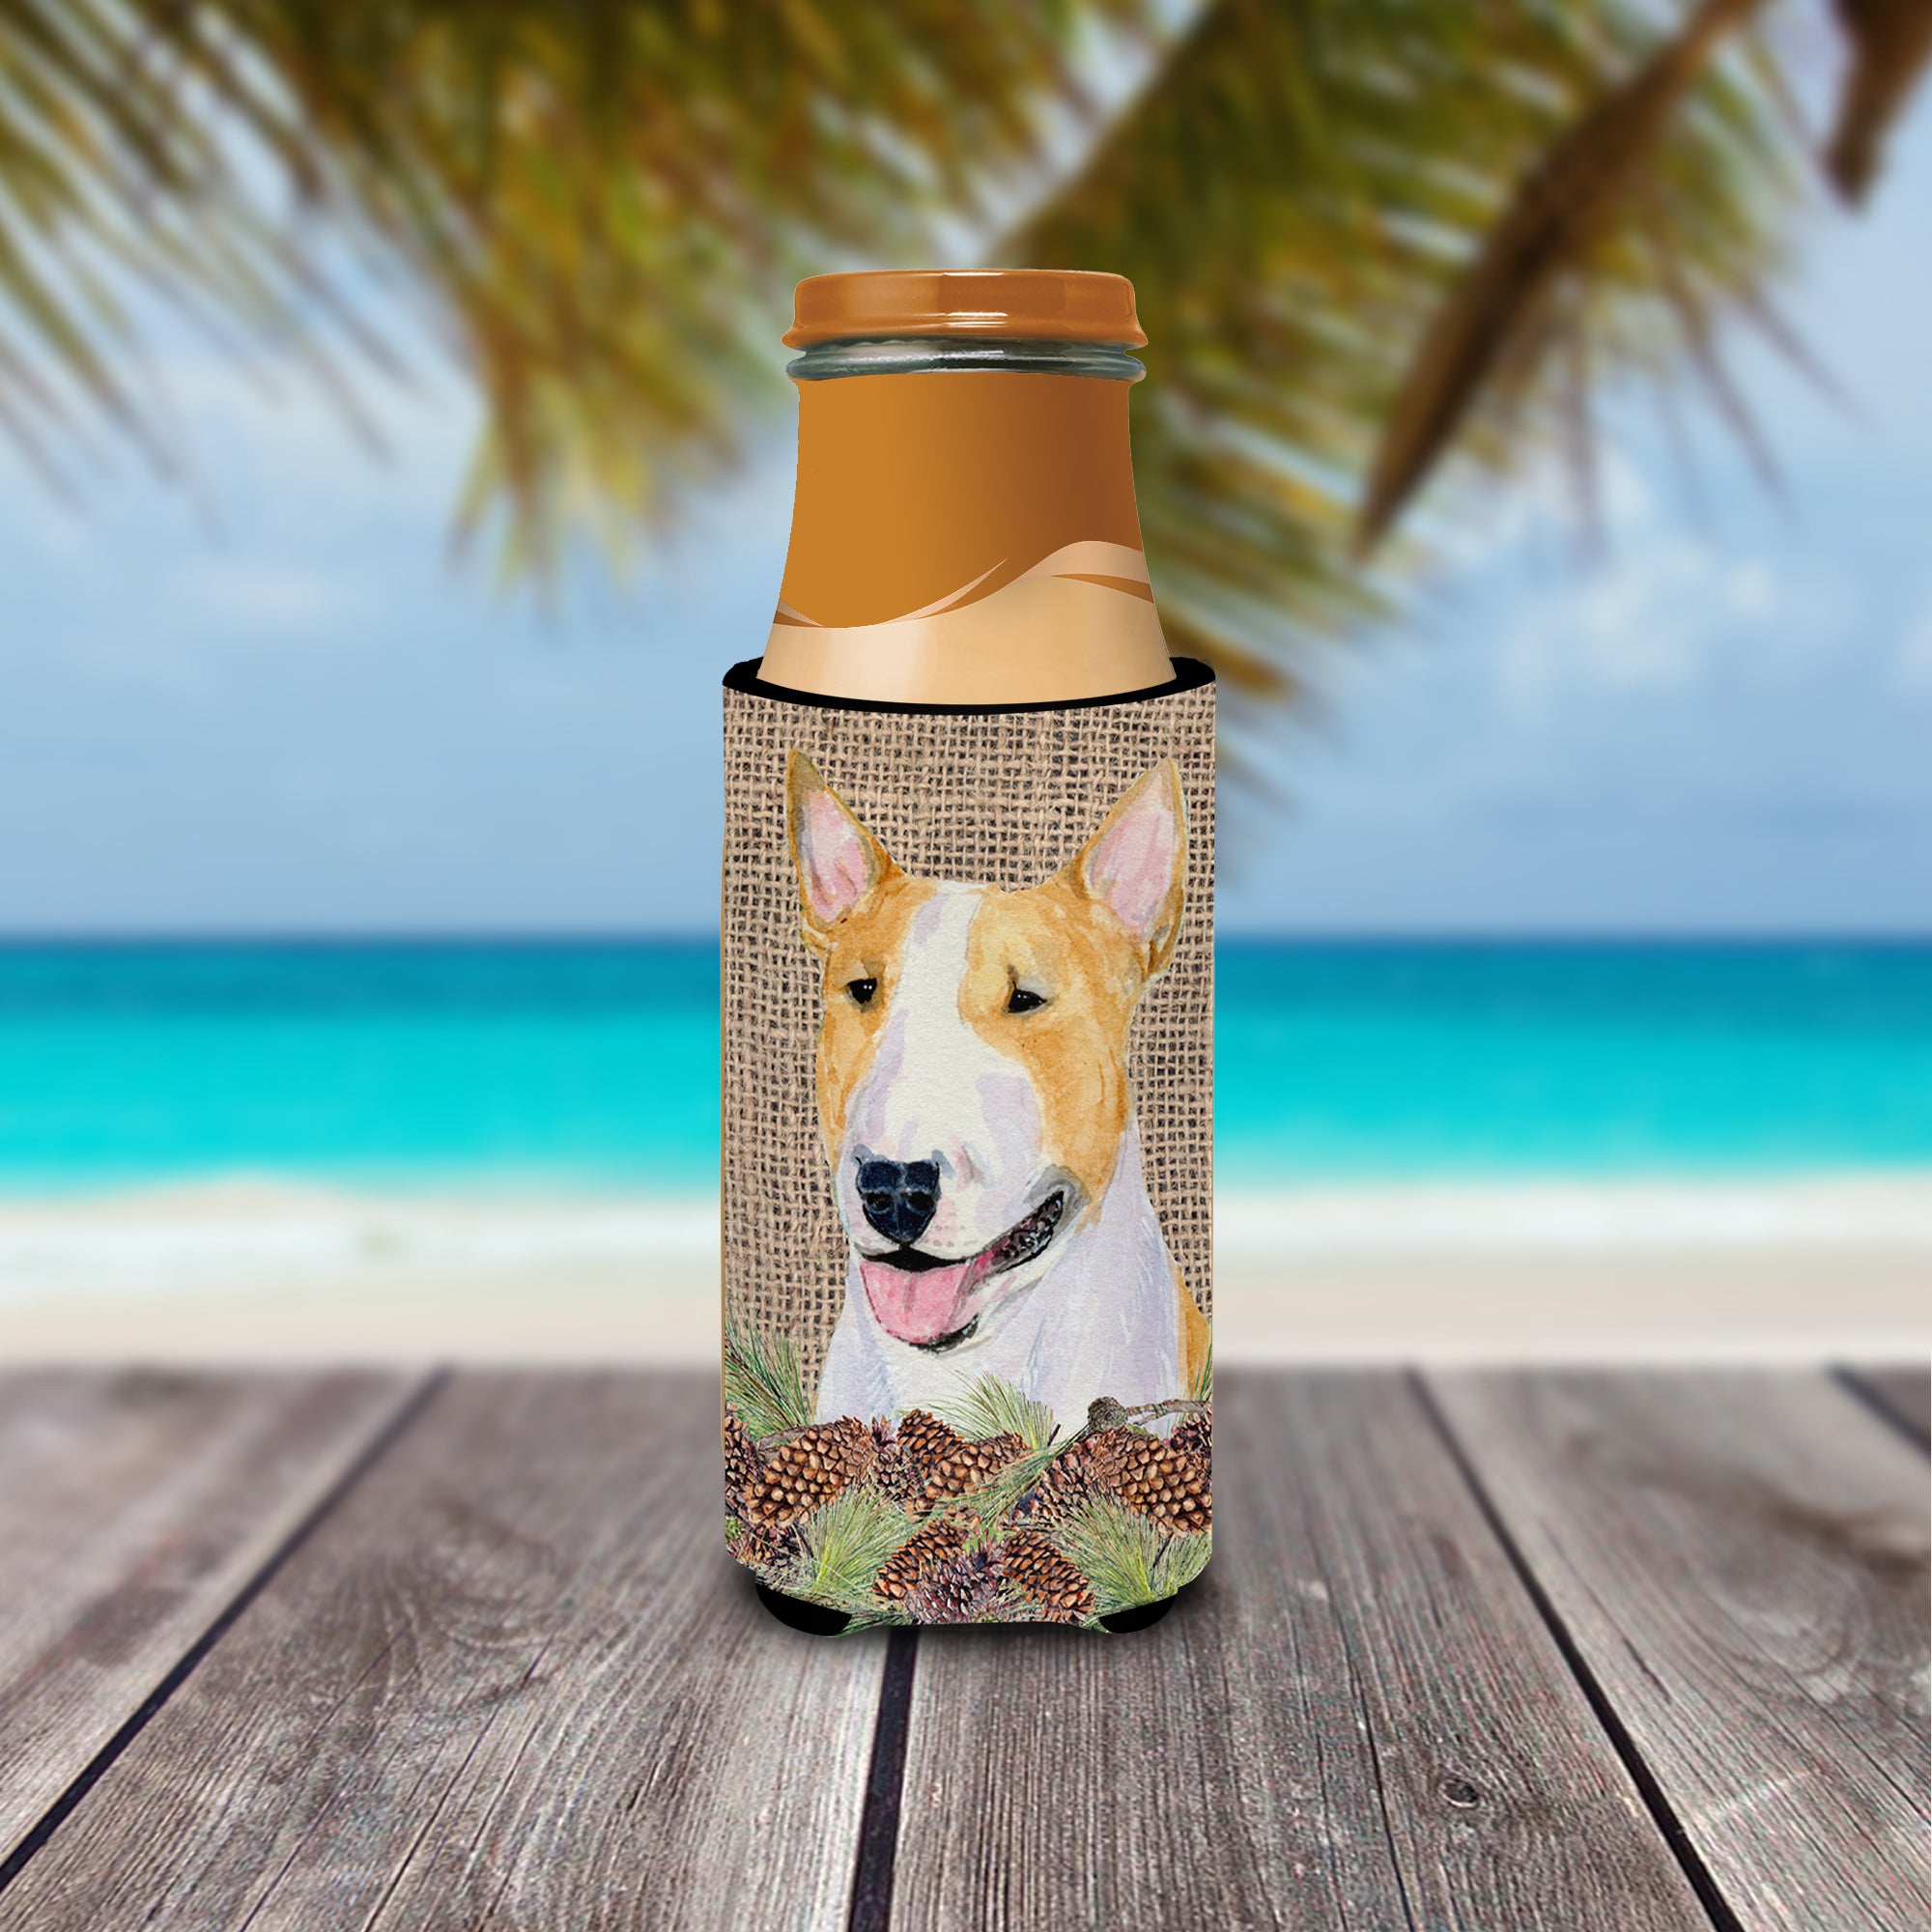 Bull Terrier on Faux Burlap with Pine Cones Ultra Beverage Insulators for slim cans SS4086MUK